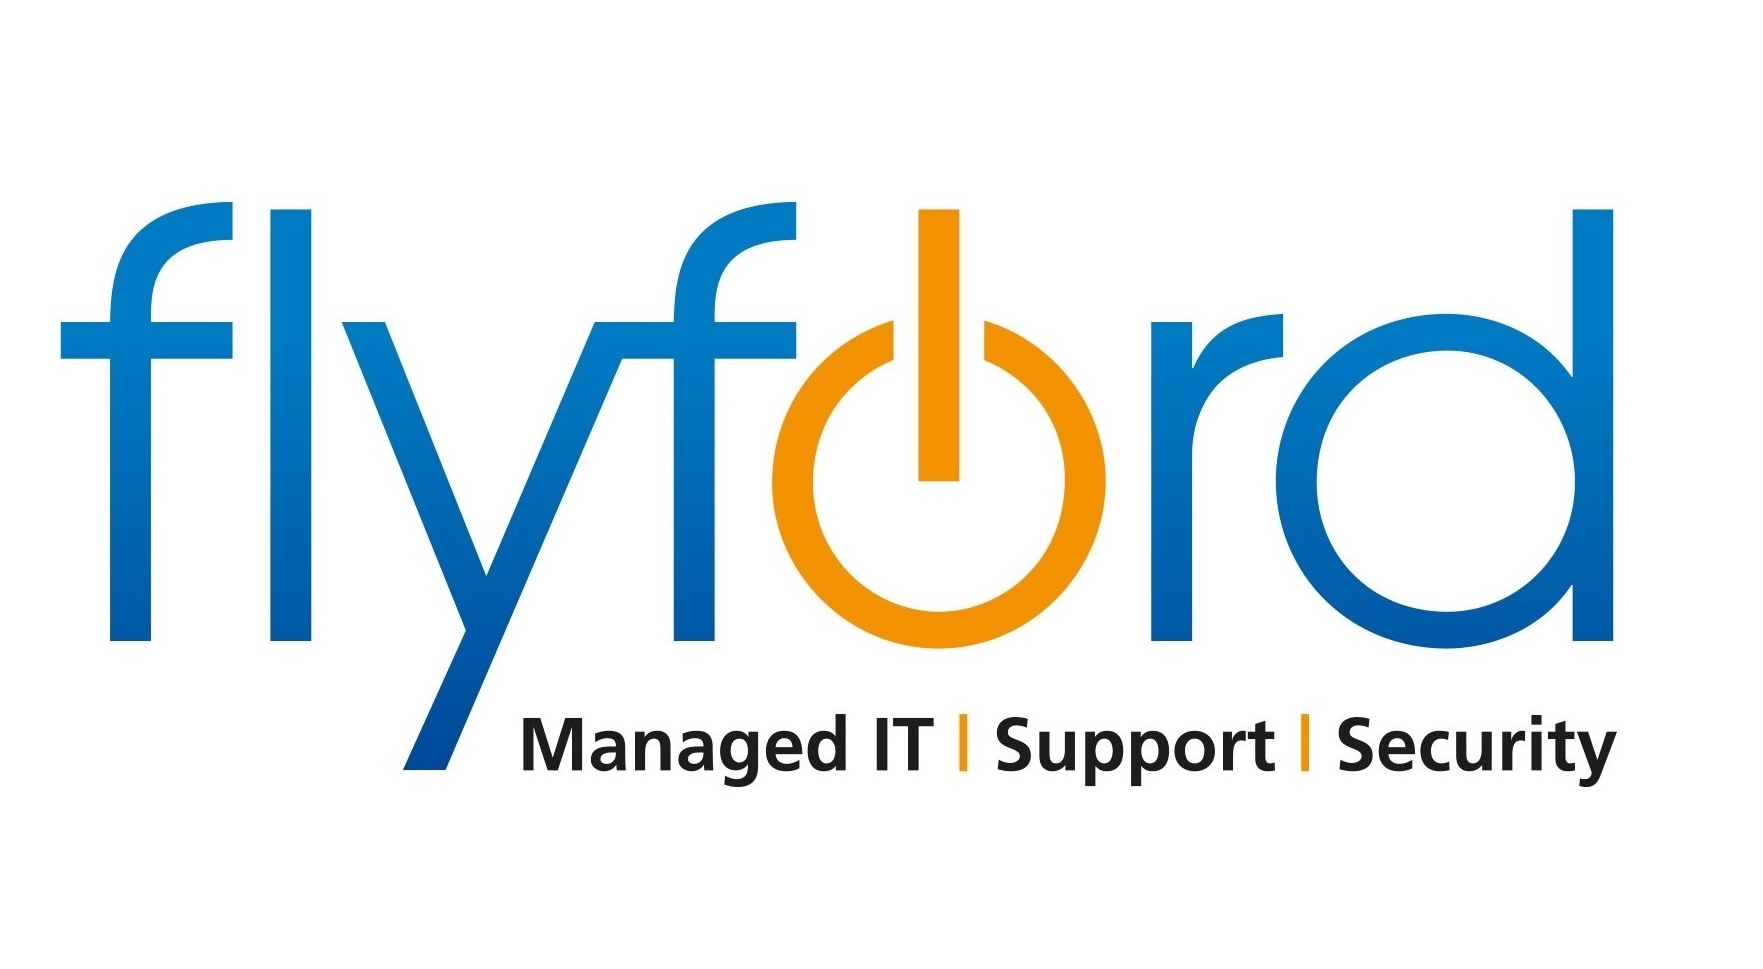 Flyford Connect